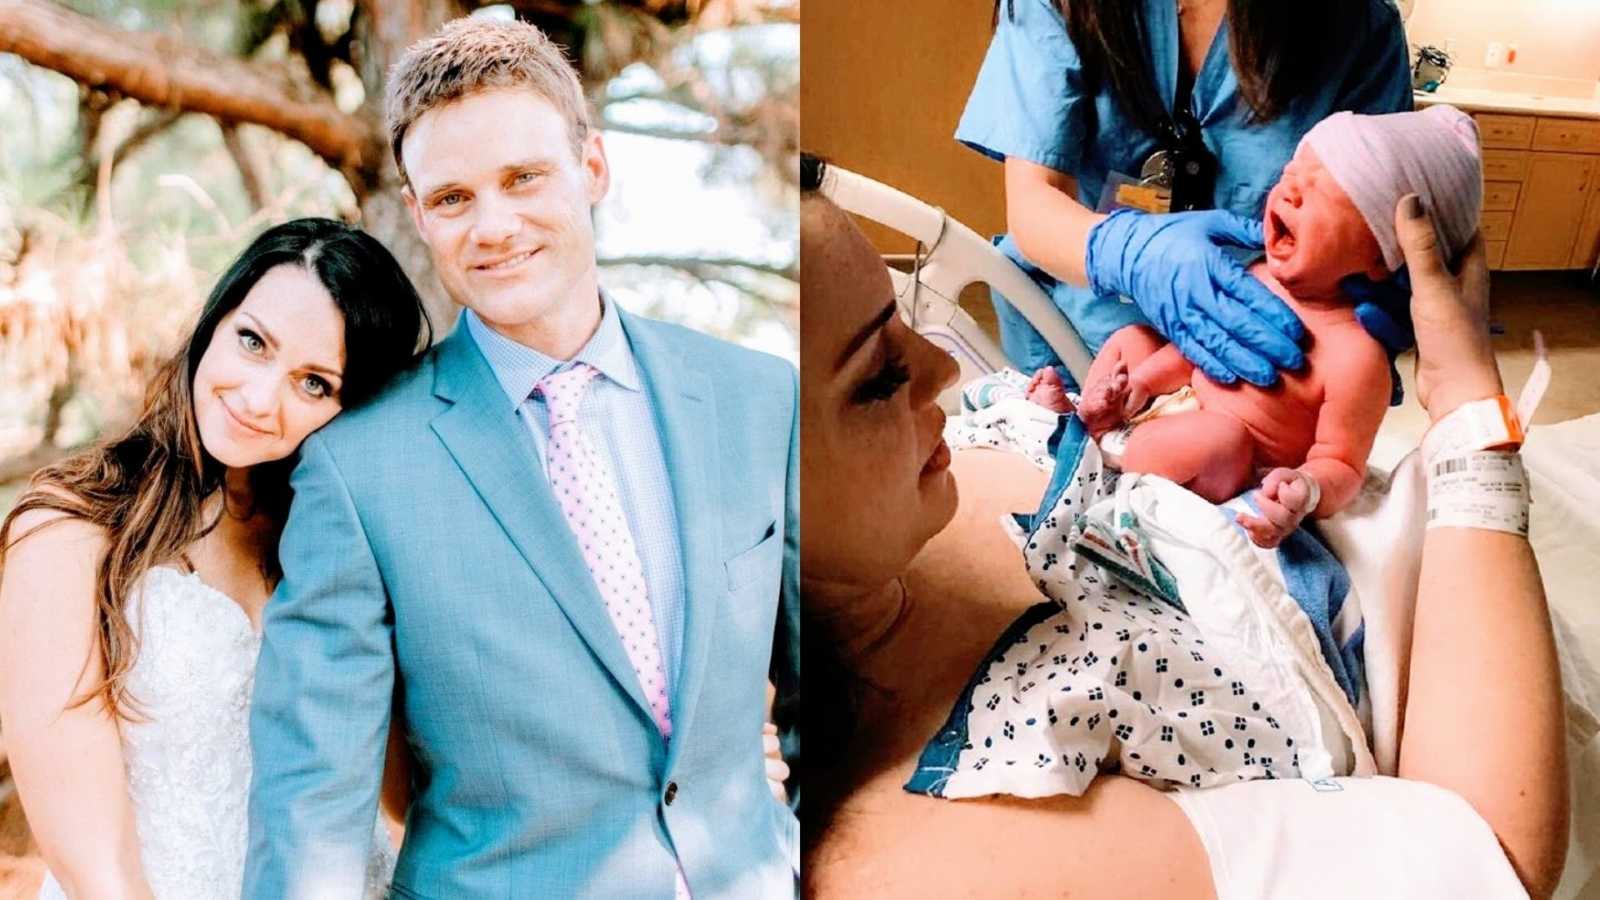 A young couple together on their wedding day and a widow holds her newborn in the hospital